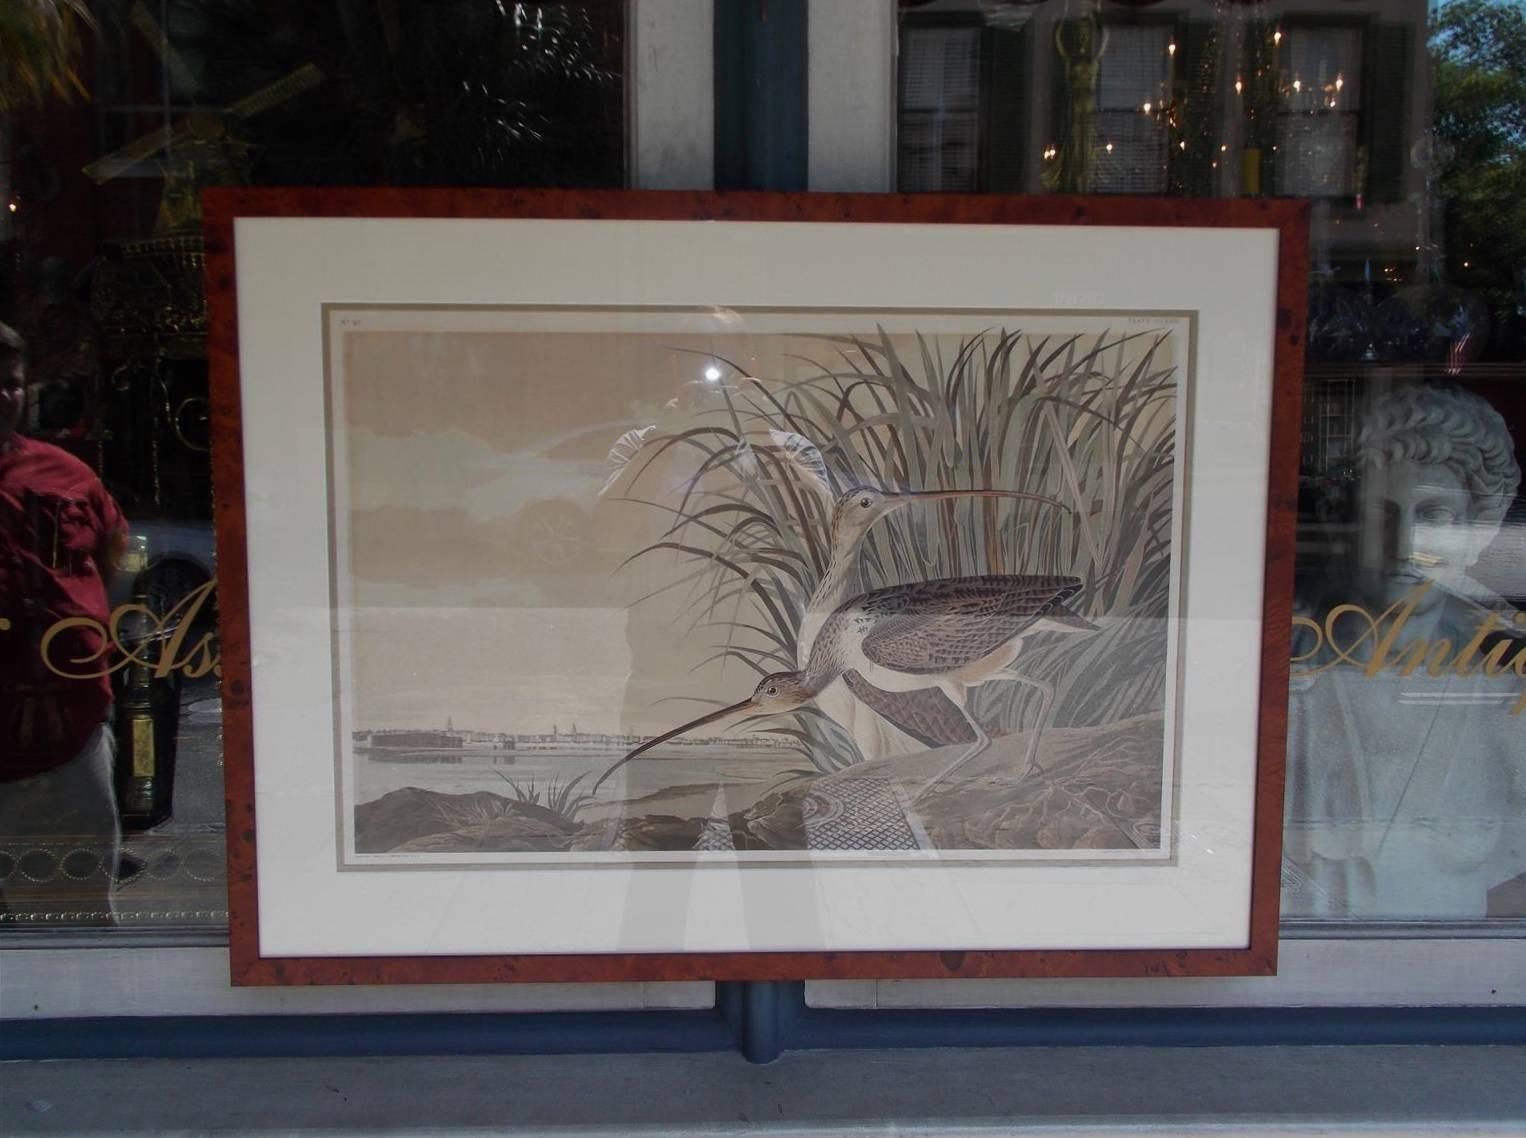 American Audubon hand colored lithograph by Macmillan, under conservation glass, framed in burl walnut, long-billed curlew in Charleston Harbor. The Birds of America, Number 47, Plate CC-XXXI, Circa 1937.